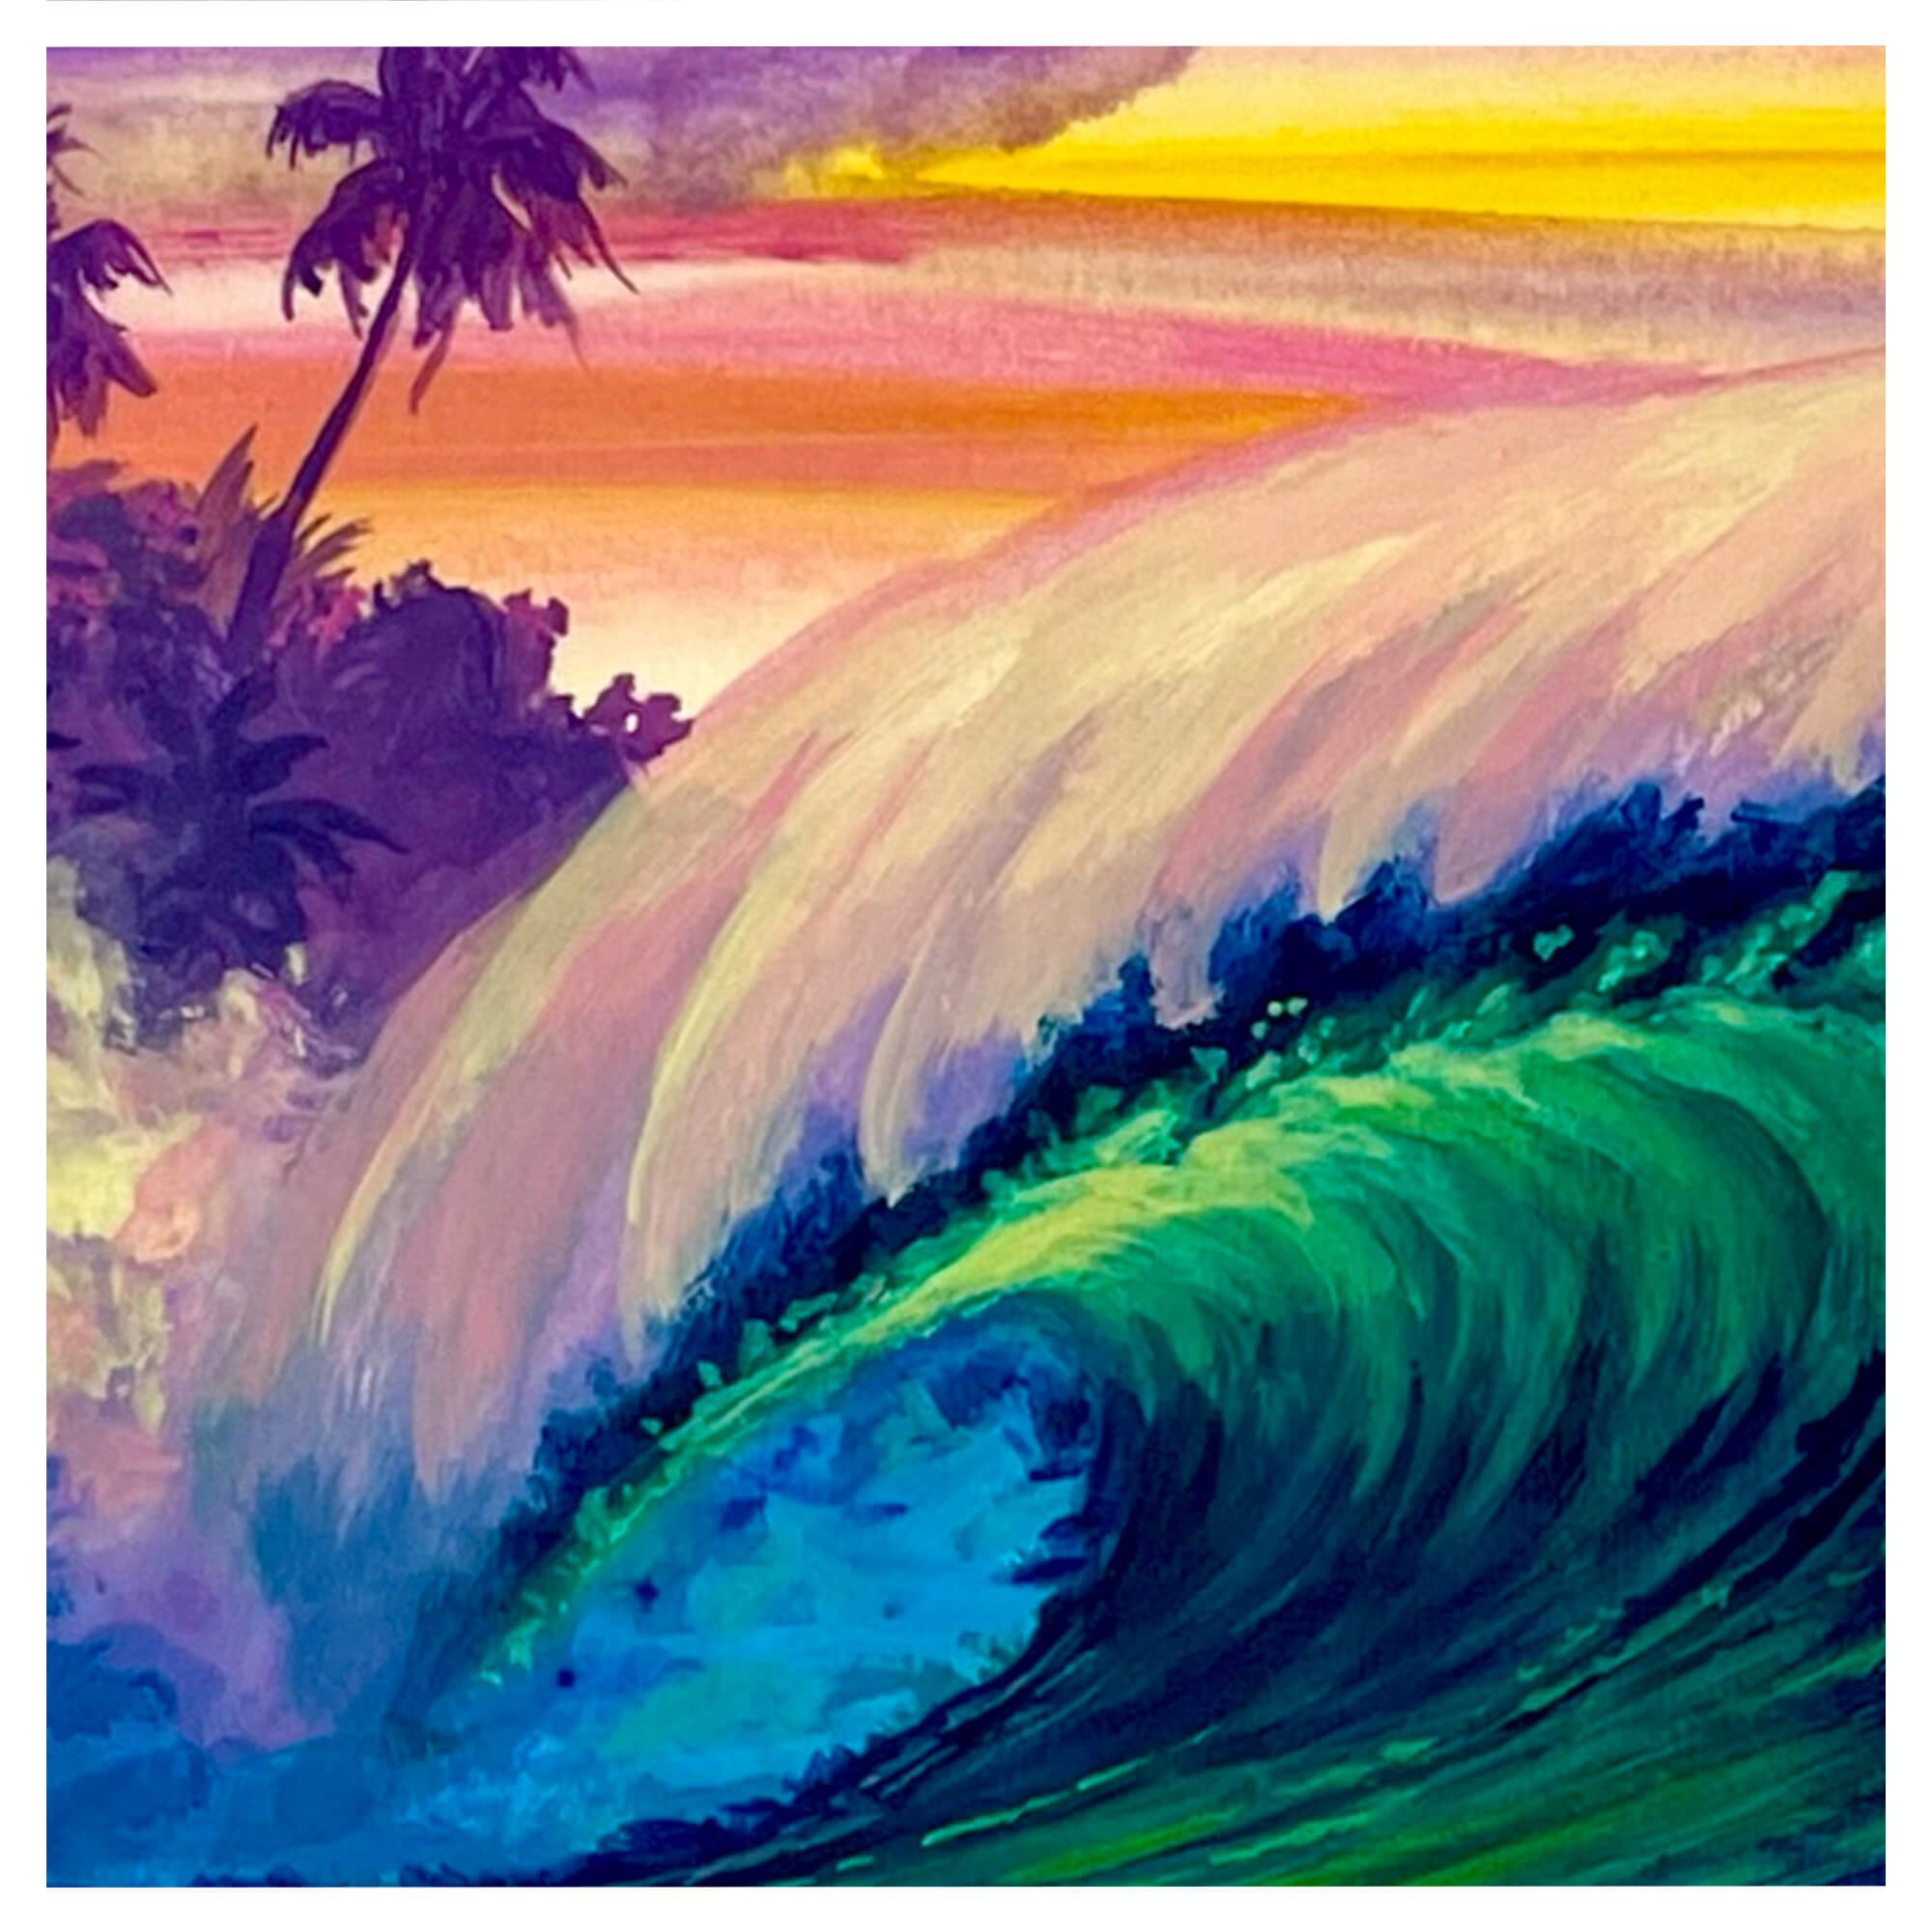 Colorful wave art by Hawaii artist Patrick Parker